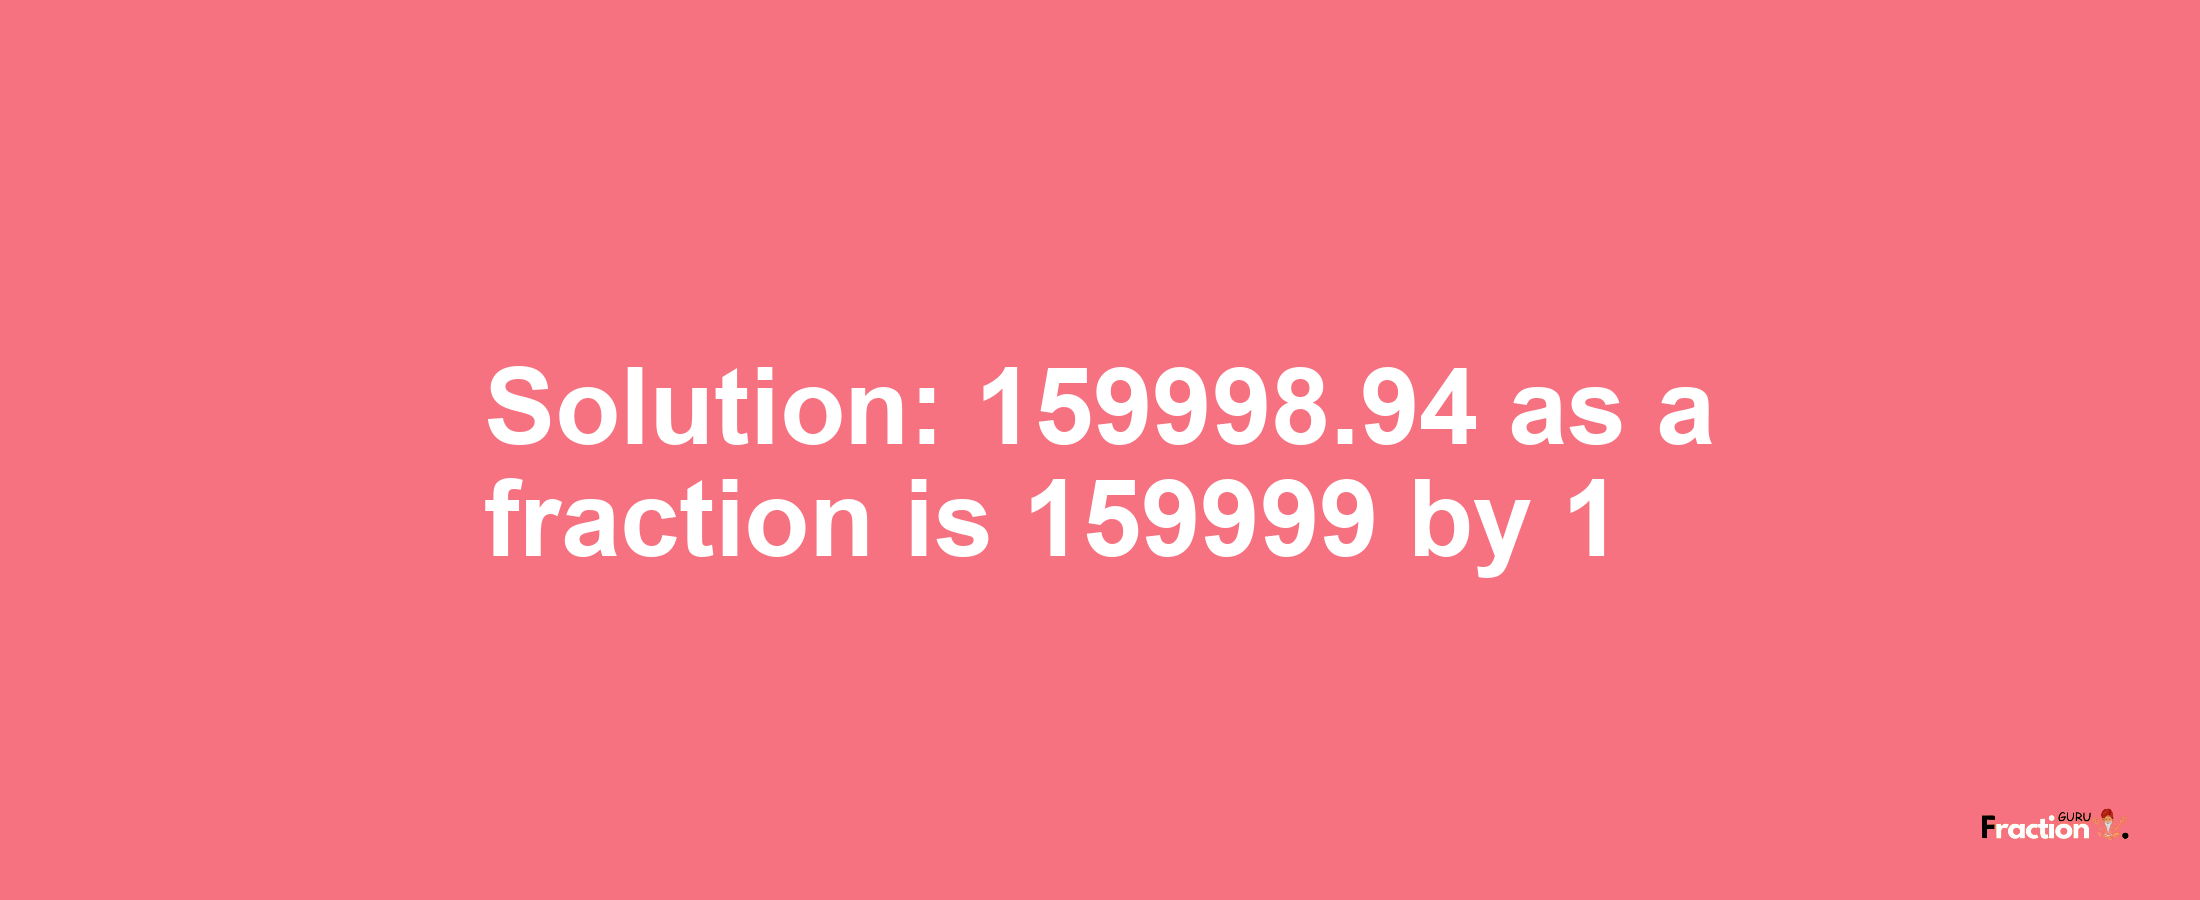 Solution:159998.94 as a fraction is 159999/1